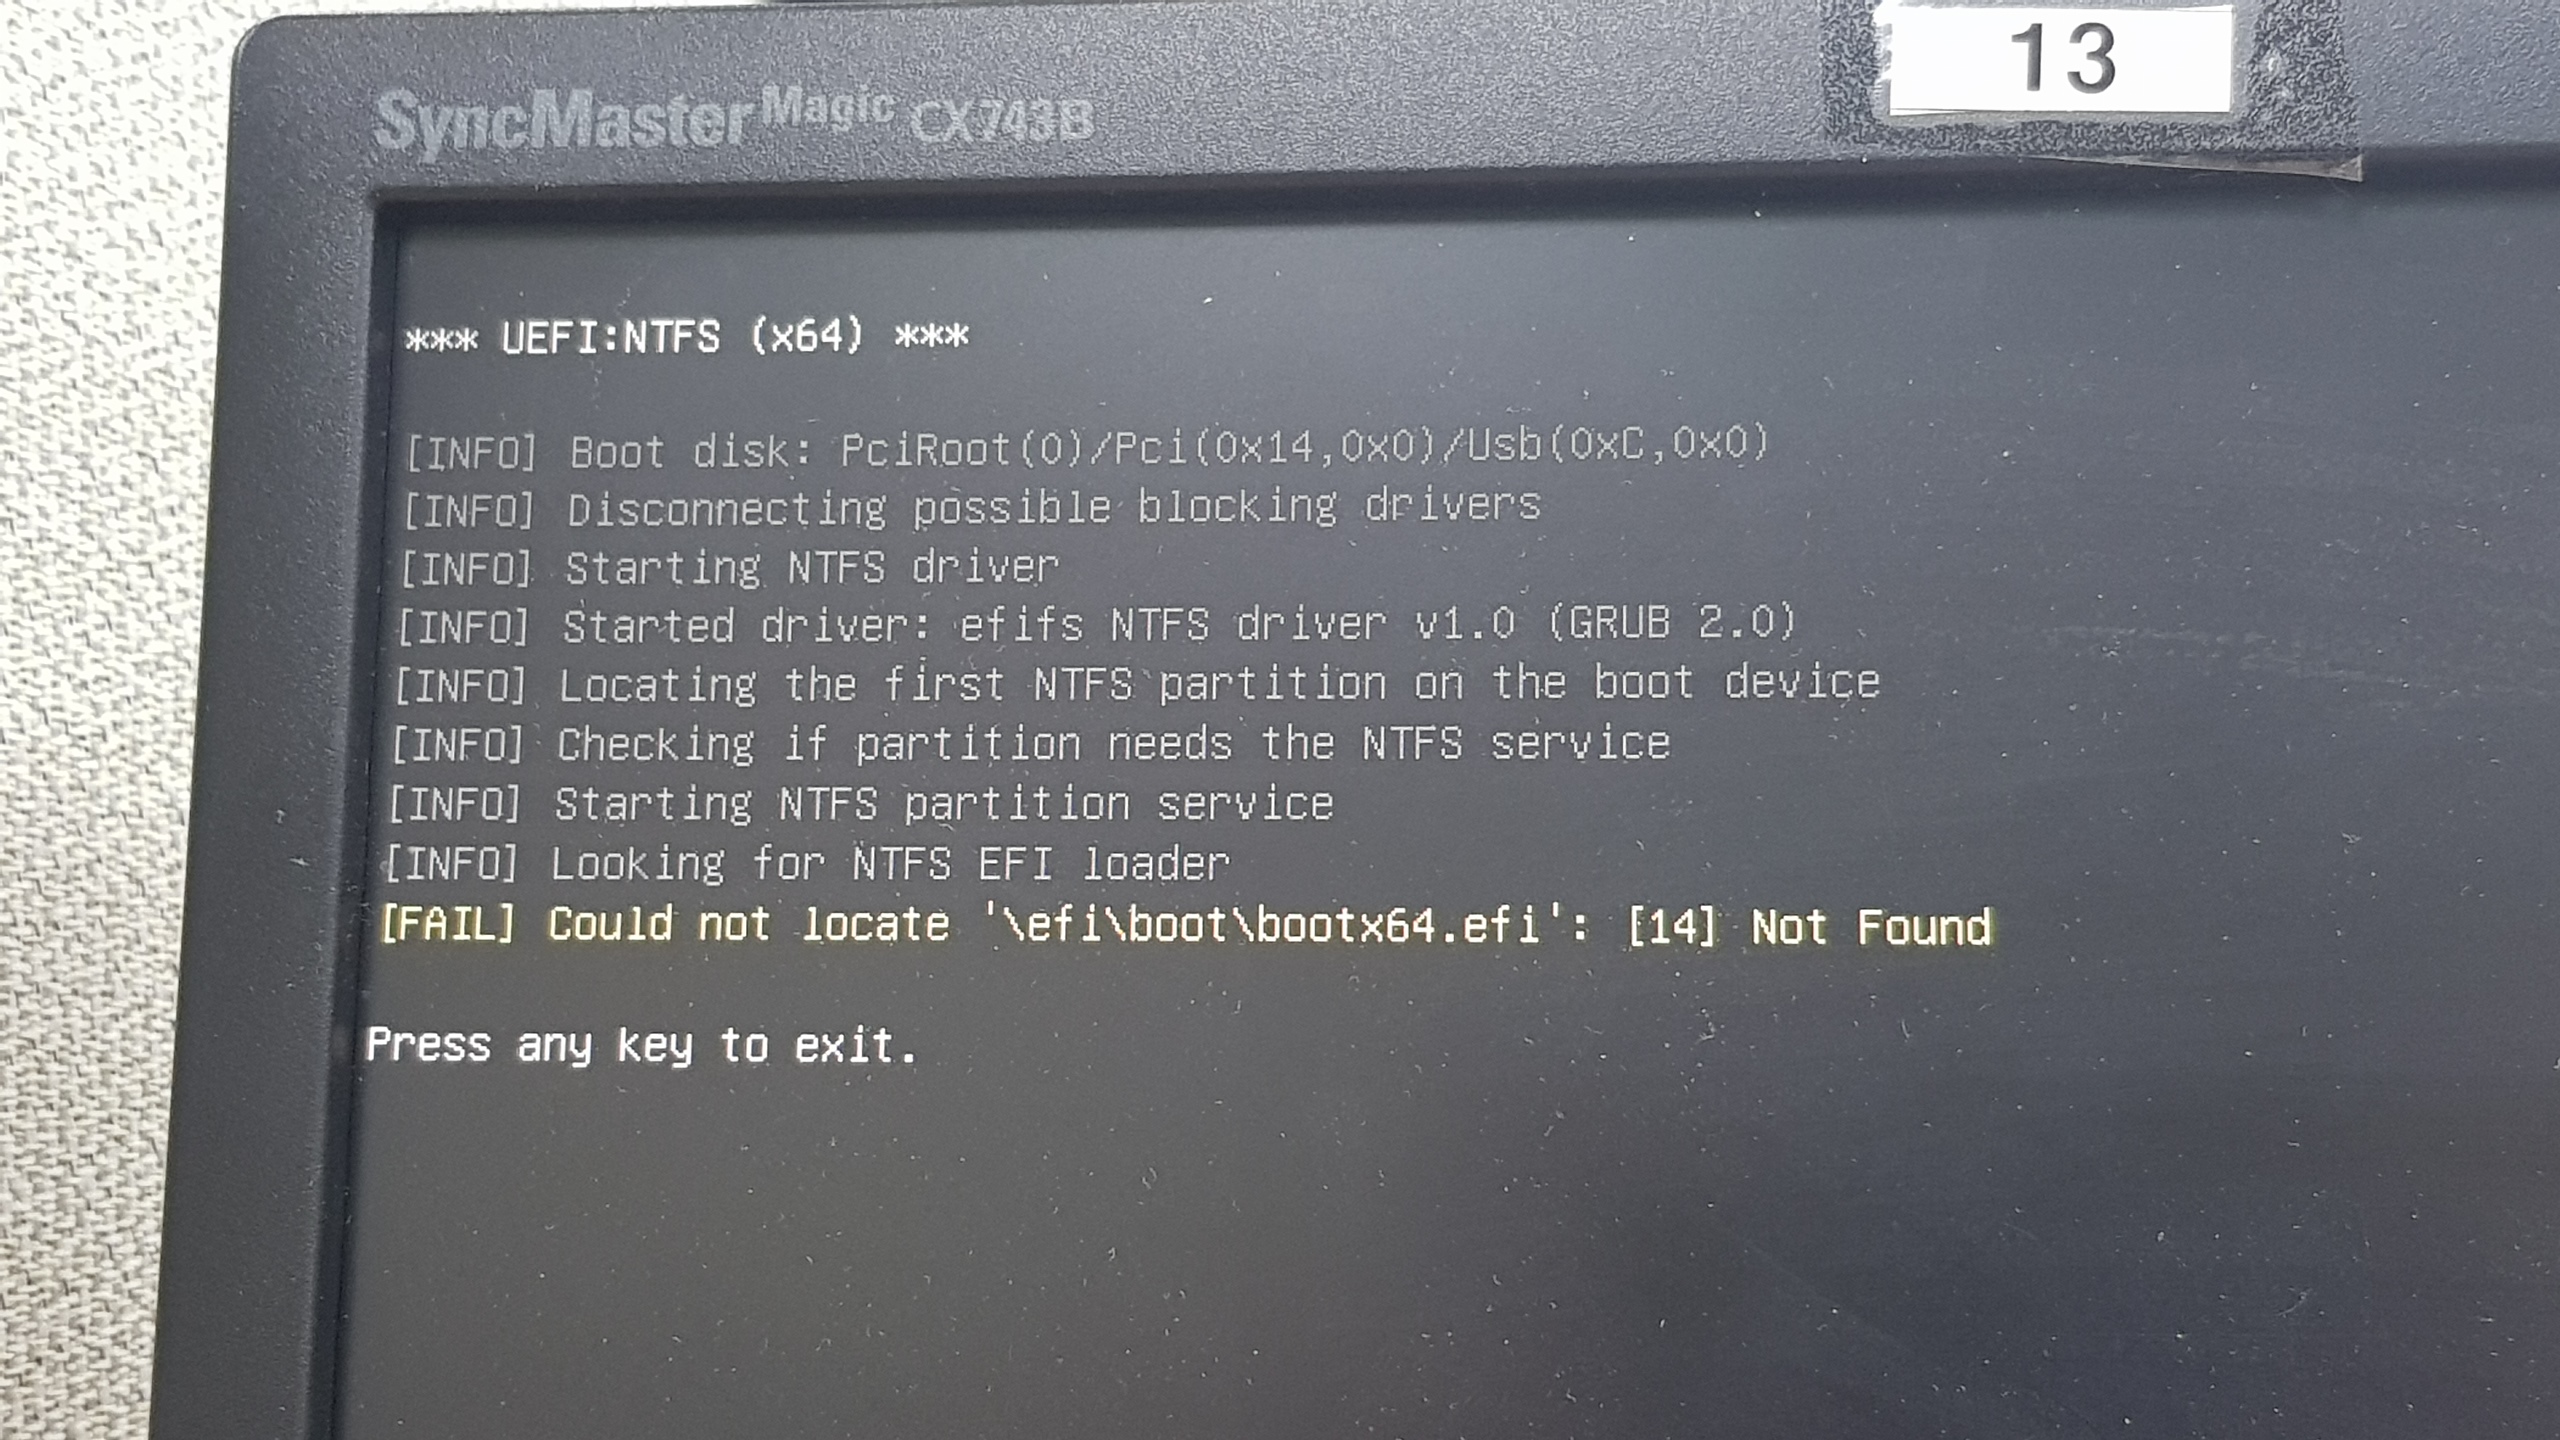 failed to detect an efi file system on device